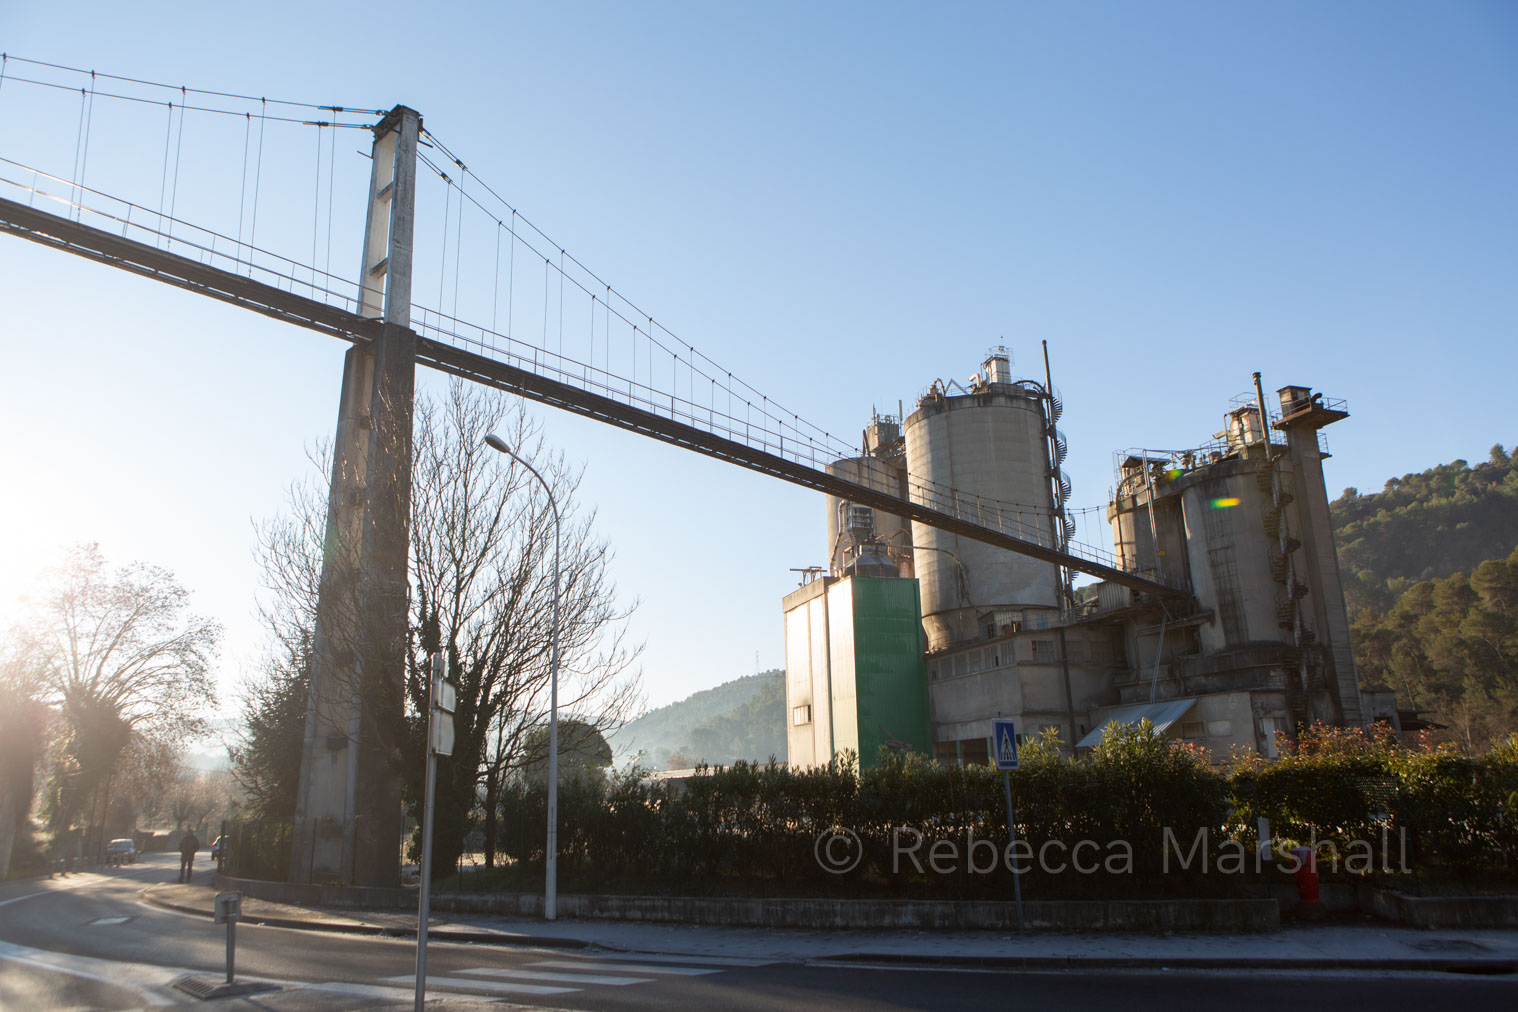 Photograph of the towers of a cement factory beside a road